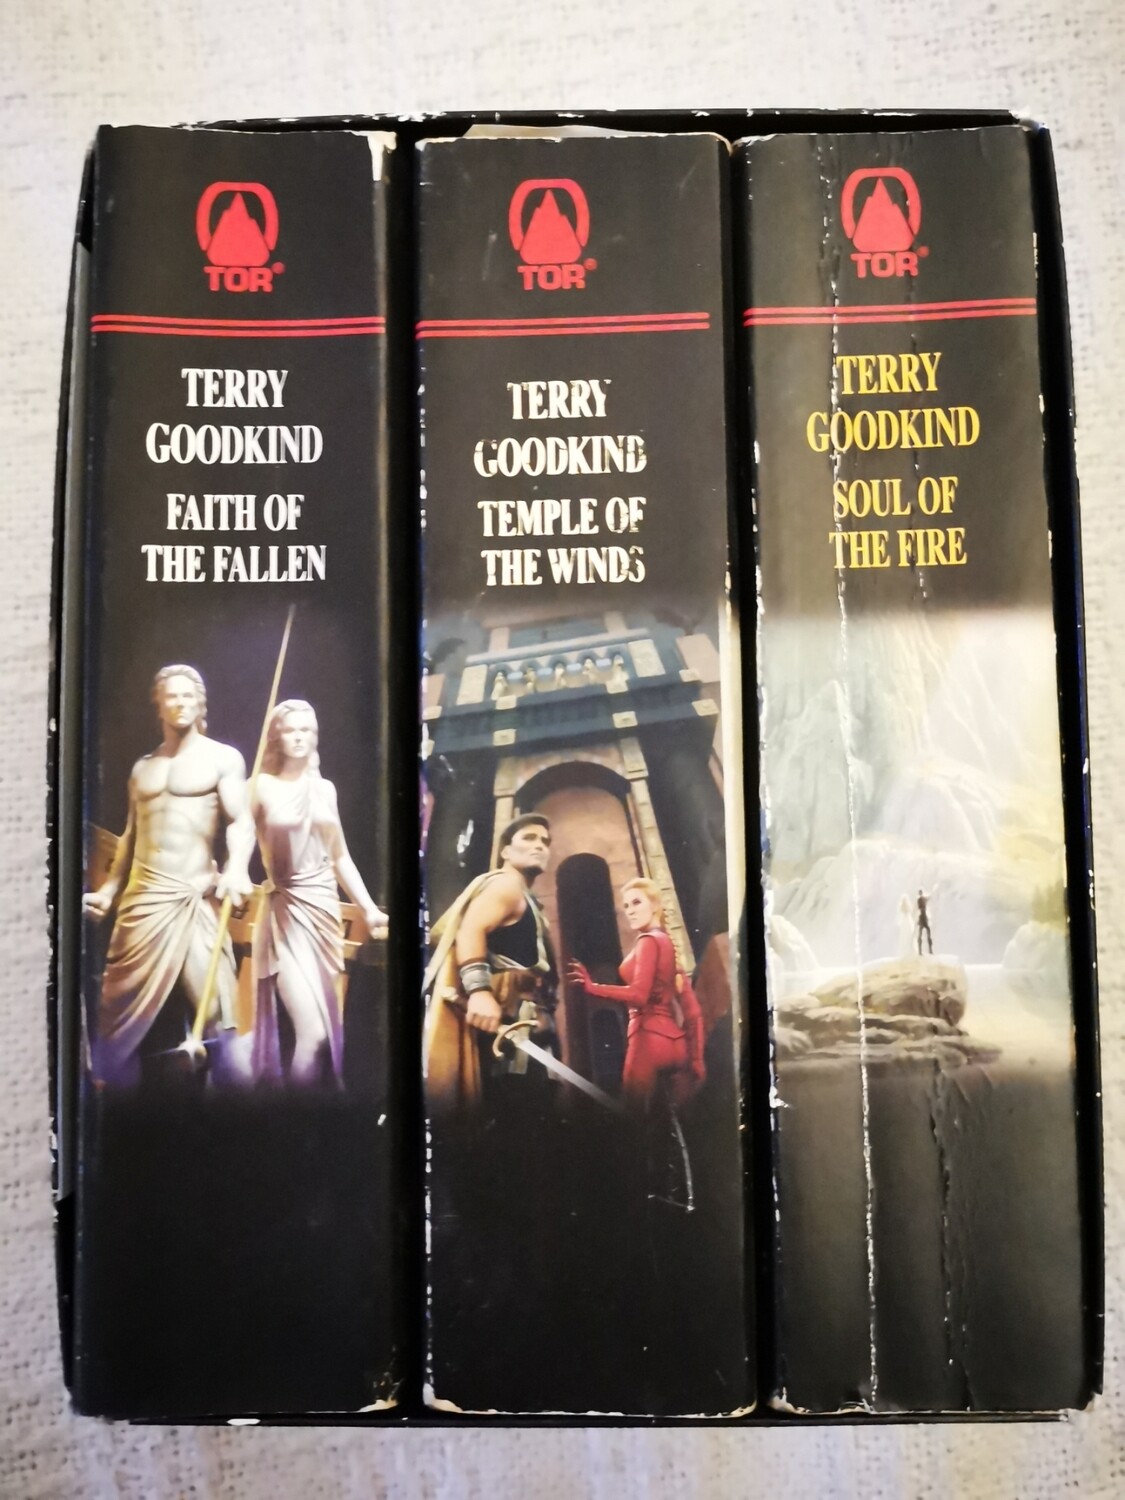 The Sword of truth trilogy